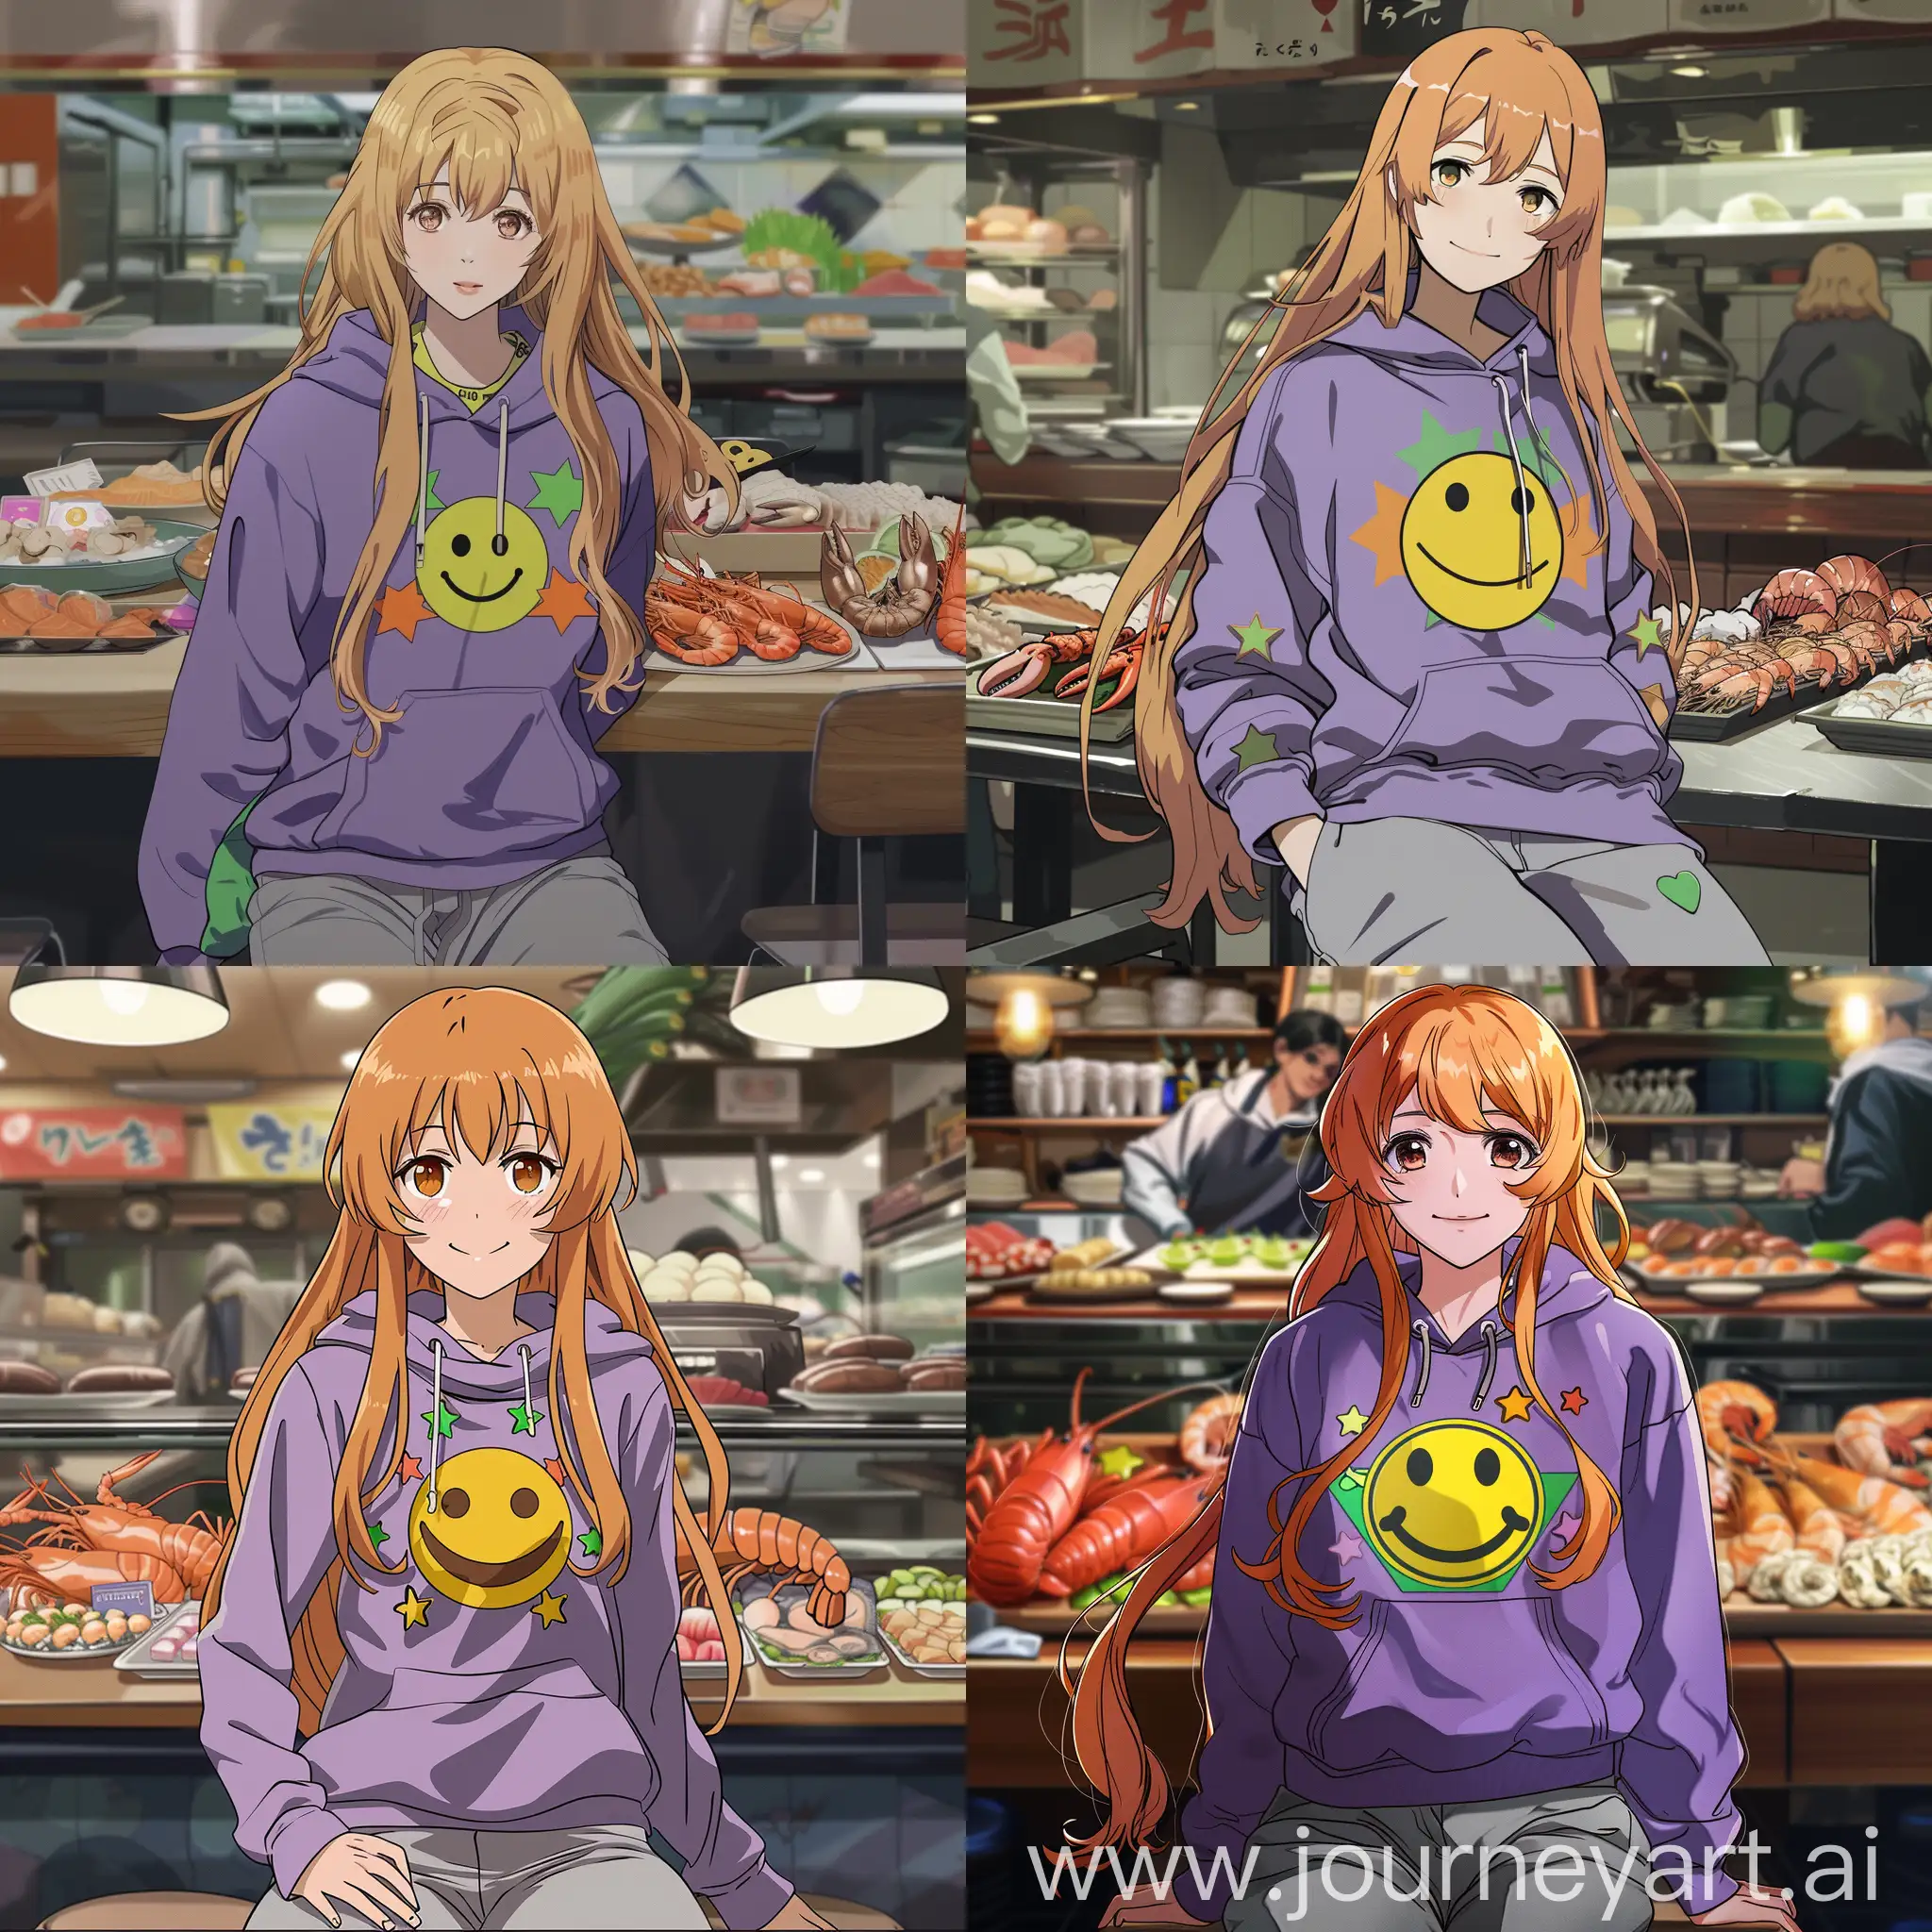 In the style of a cute anime; Hand drawn animation. A young 25 year old woman, cute, attractive. Waist length flowing hair that is blonde at the roots and fades to ginger at the tips. She is wearing a purple hoodie with a yellow smiley face, green and orange star patches on it. grey sweatpants. She is sitting in a resturant infront of a table with all sorts of seafood spread. Lobster, etc.